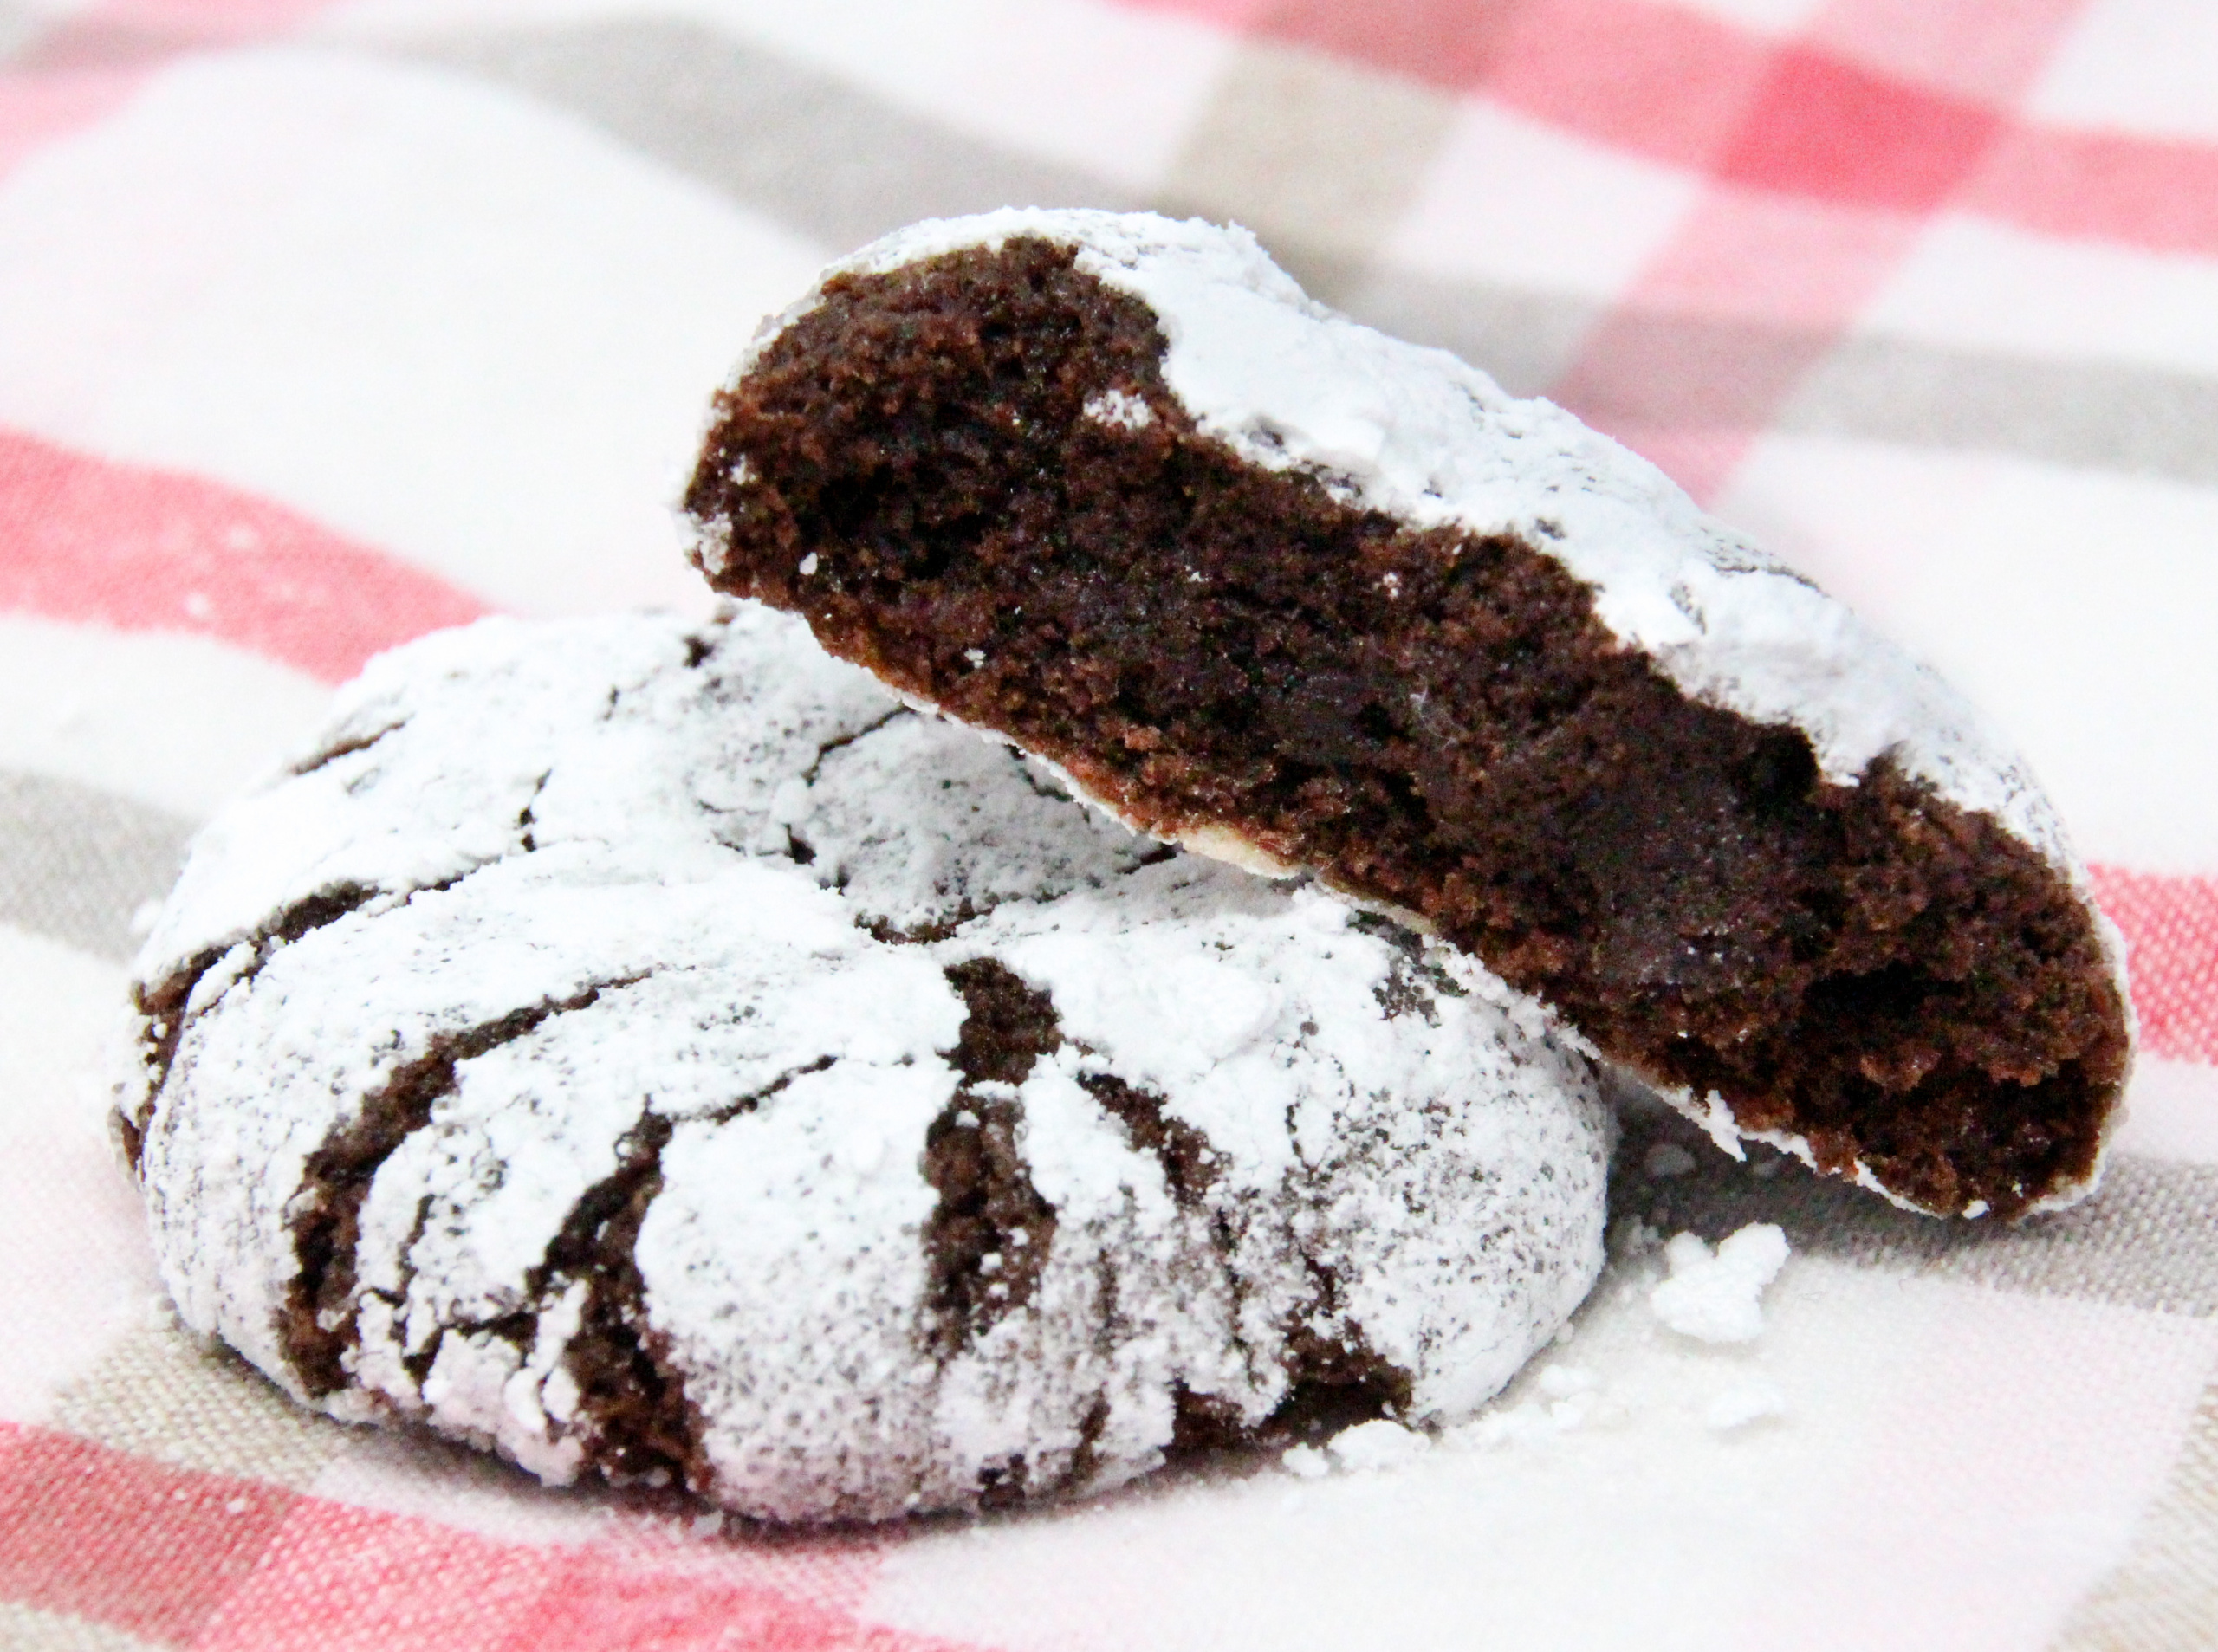 Chocolate Crinkles are rolled into both granulated and powdered sugar before baking, giving the cookies a crisp edge and a fudgy interior cookie - heavenly! Recipe shared with permission granted by Daryl Wood Gerber, author of A HINT OF MISCHIEF.